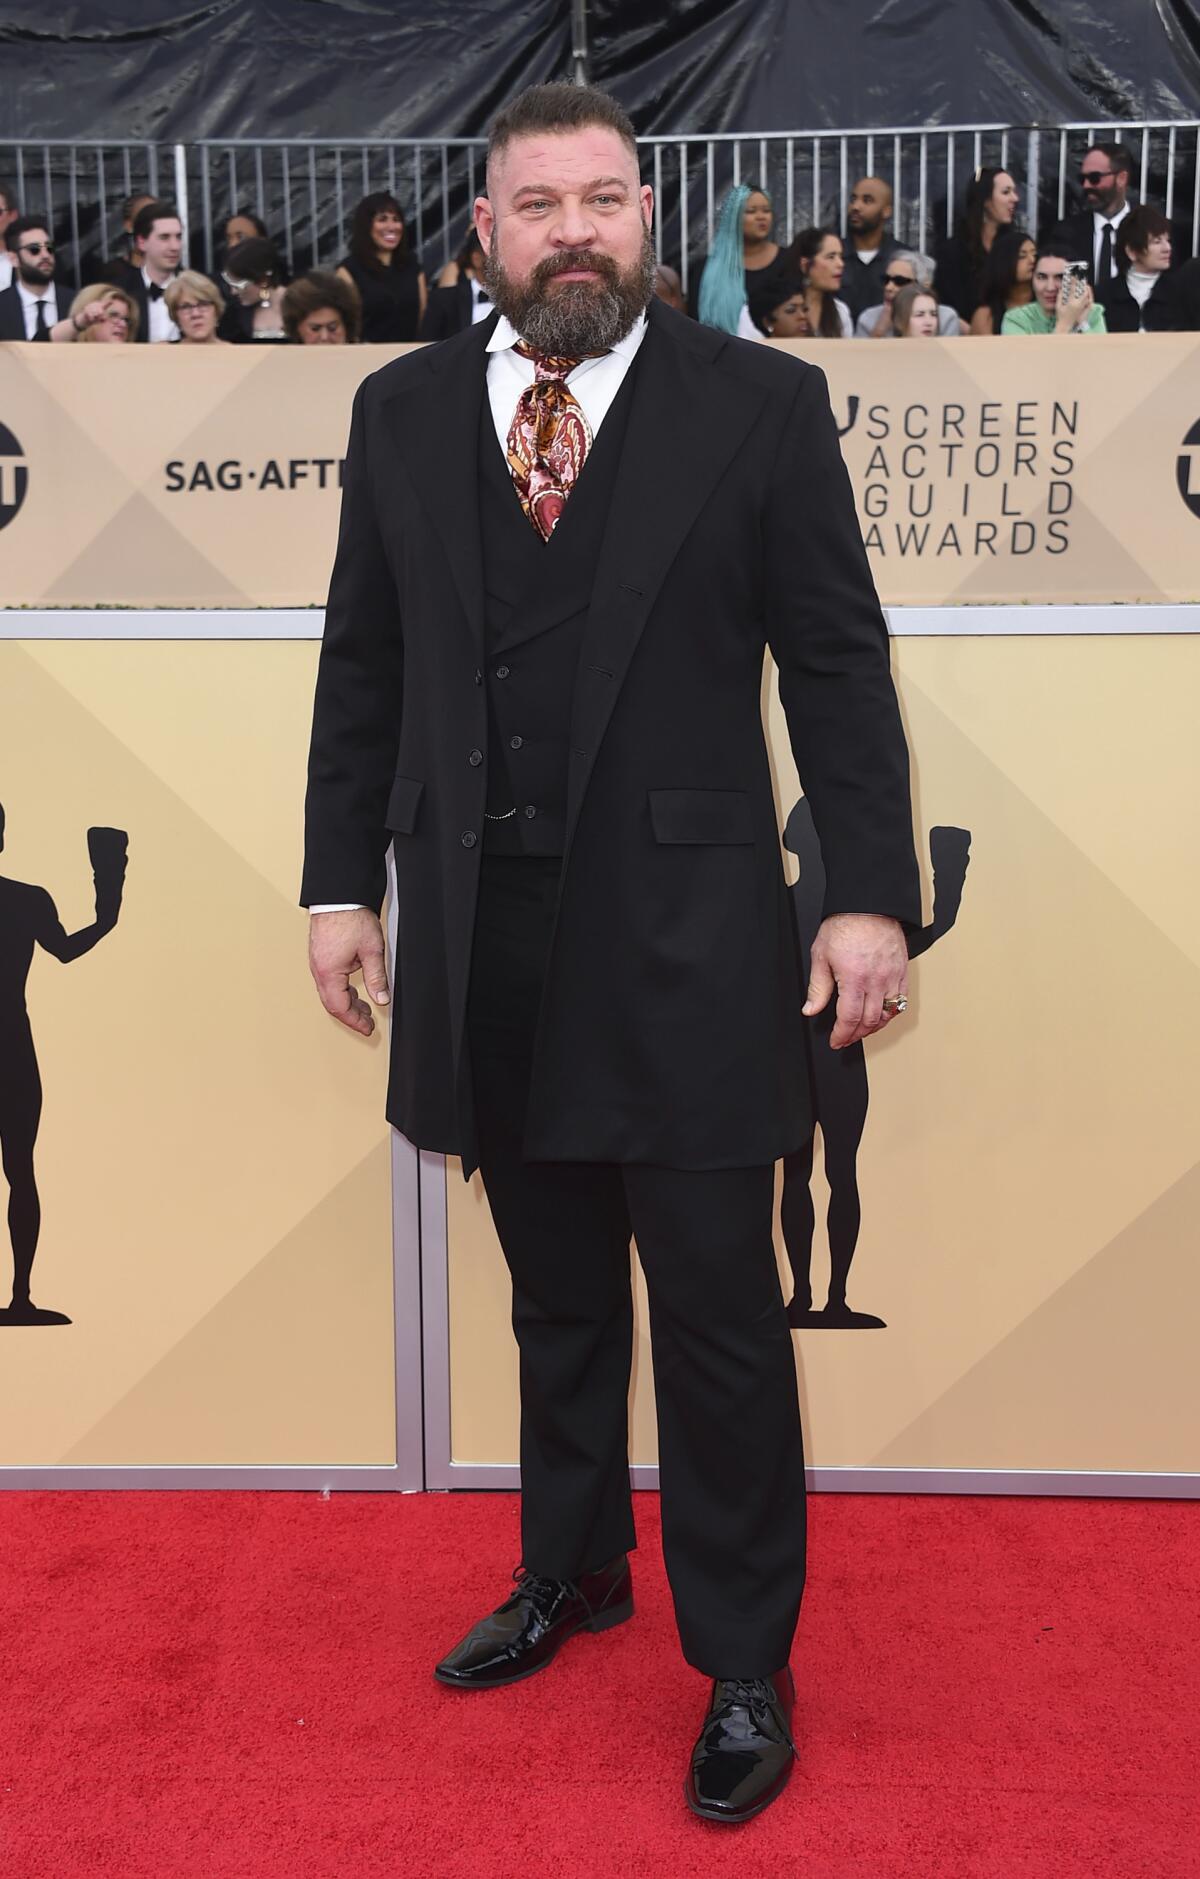 A tall man in a black three-piece suit stands on a red carpet